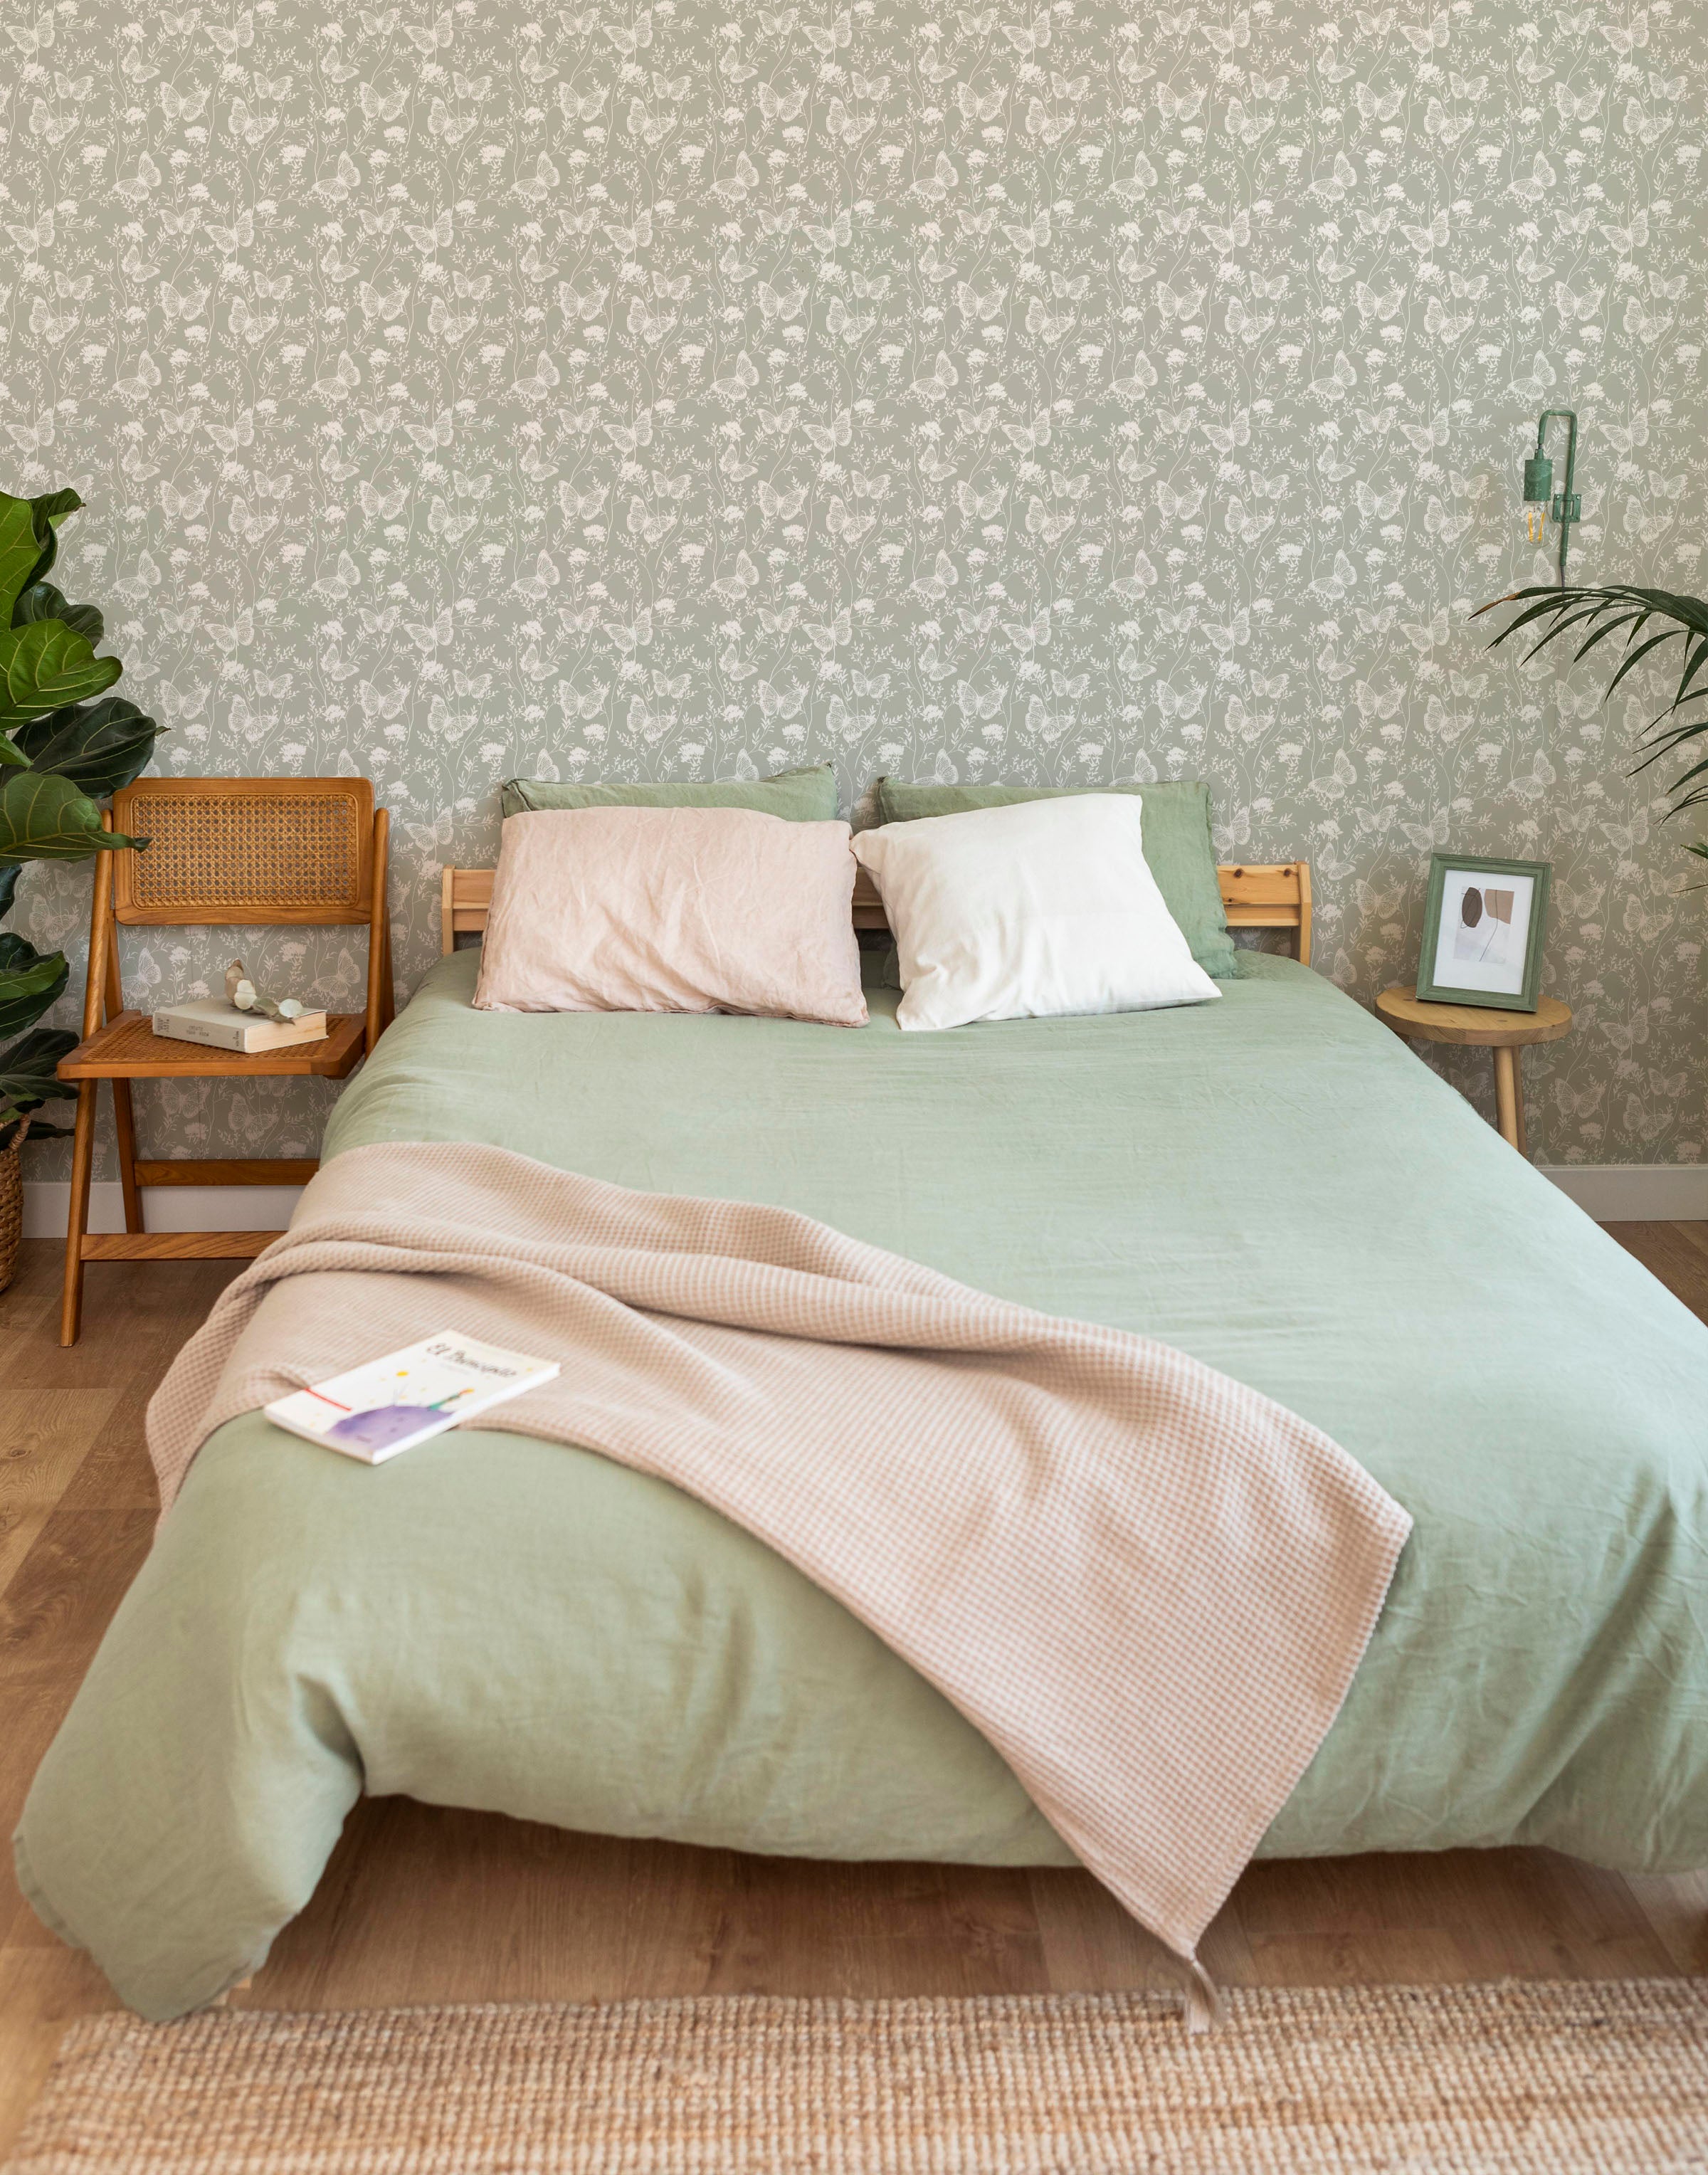 A stylish bedroom setup showing the Whimsical Wings Wallpaper-Olive as a backdrop, with light-toned bedding and a minimalistic decor that complements the intricate butterfly and floral designs on the wallpaper